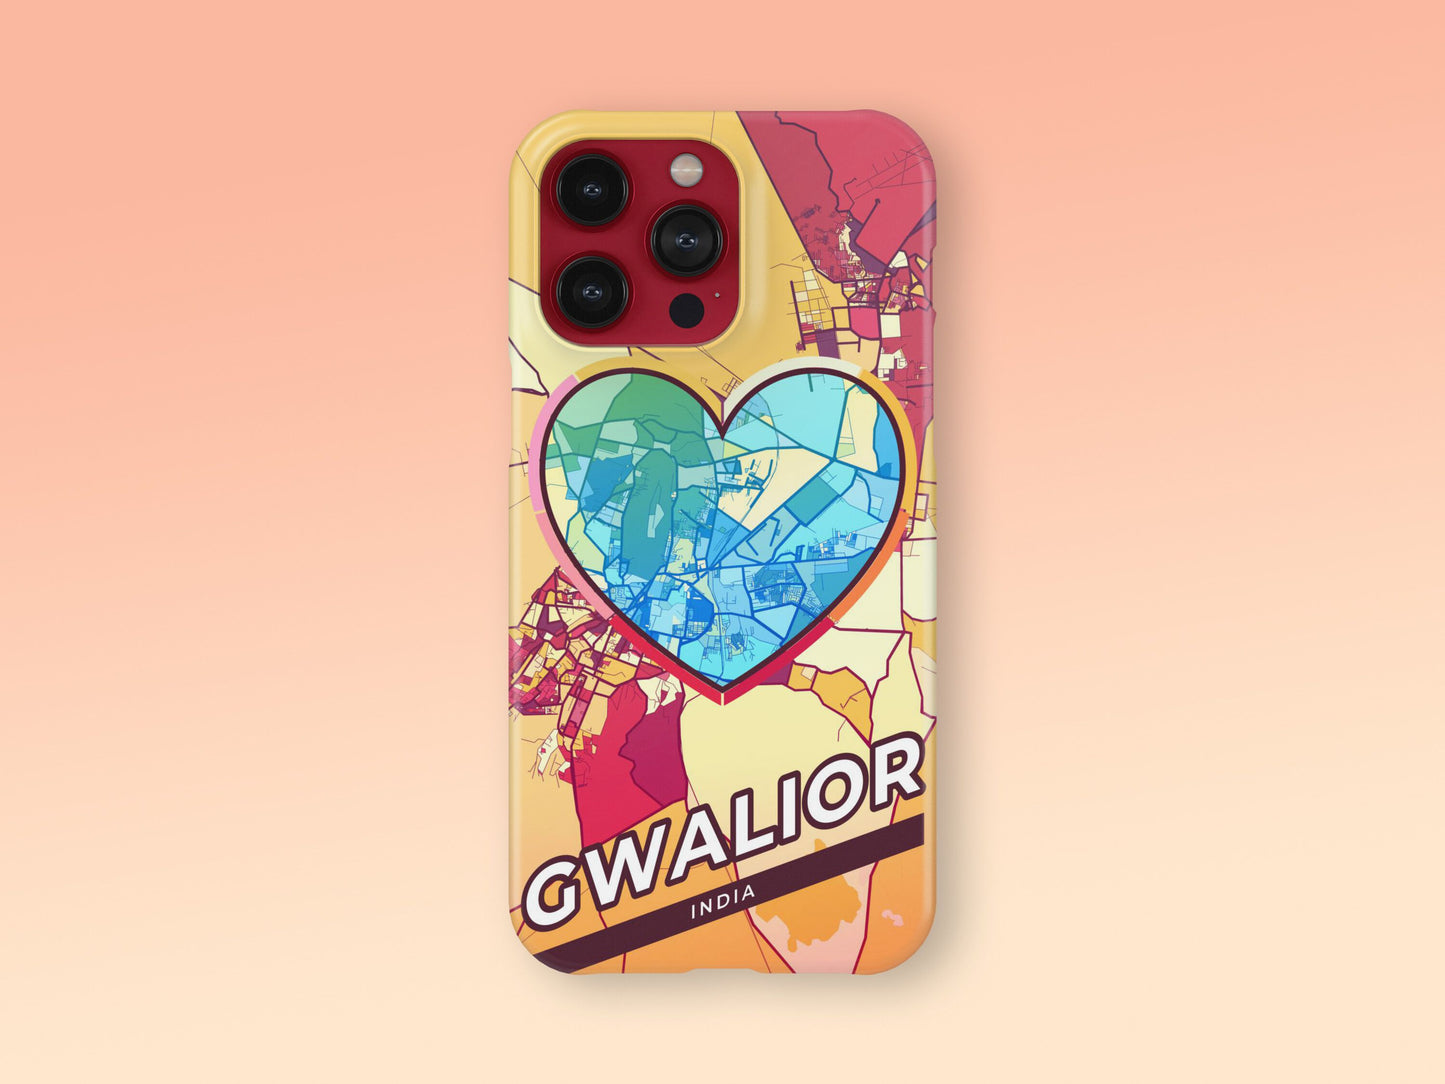 Gwalior India slim phone case with colorful icon. Birthday, wedding or housewarming gift. Couple match cases. 2